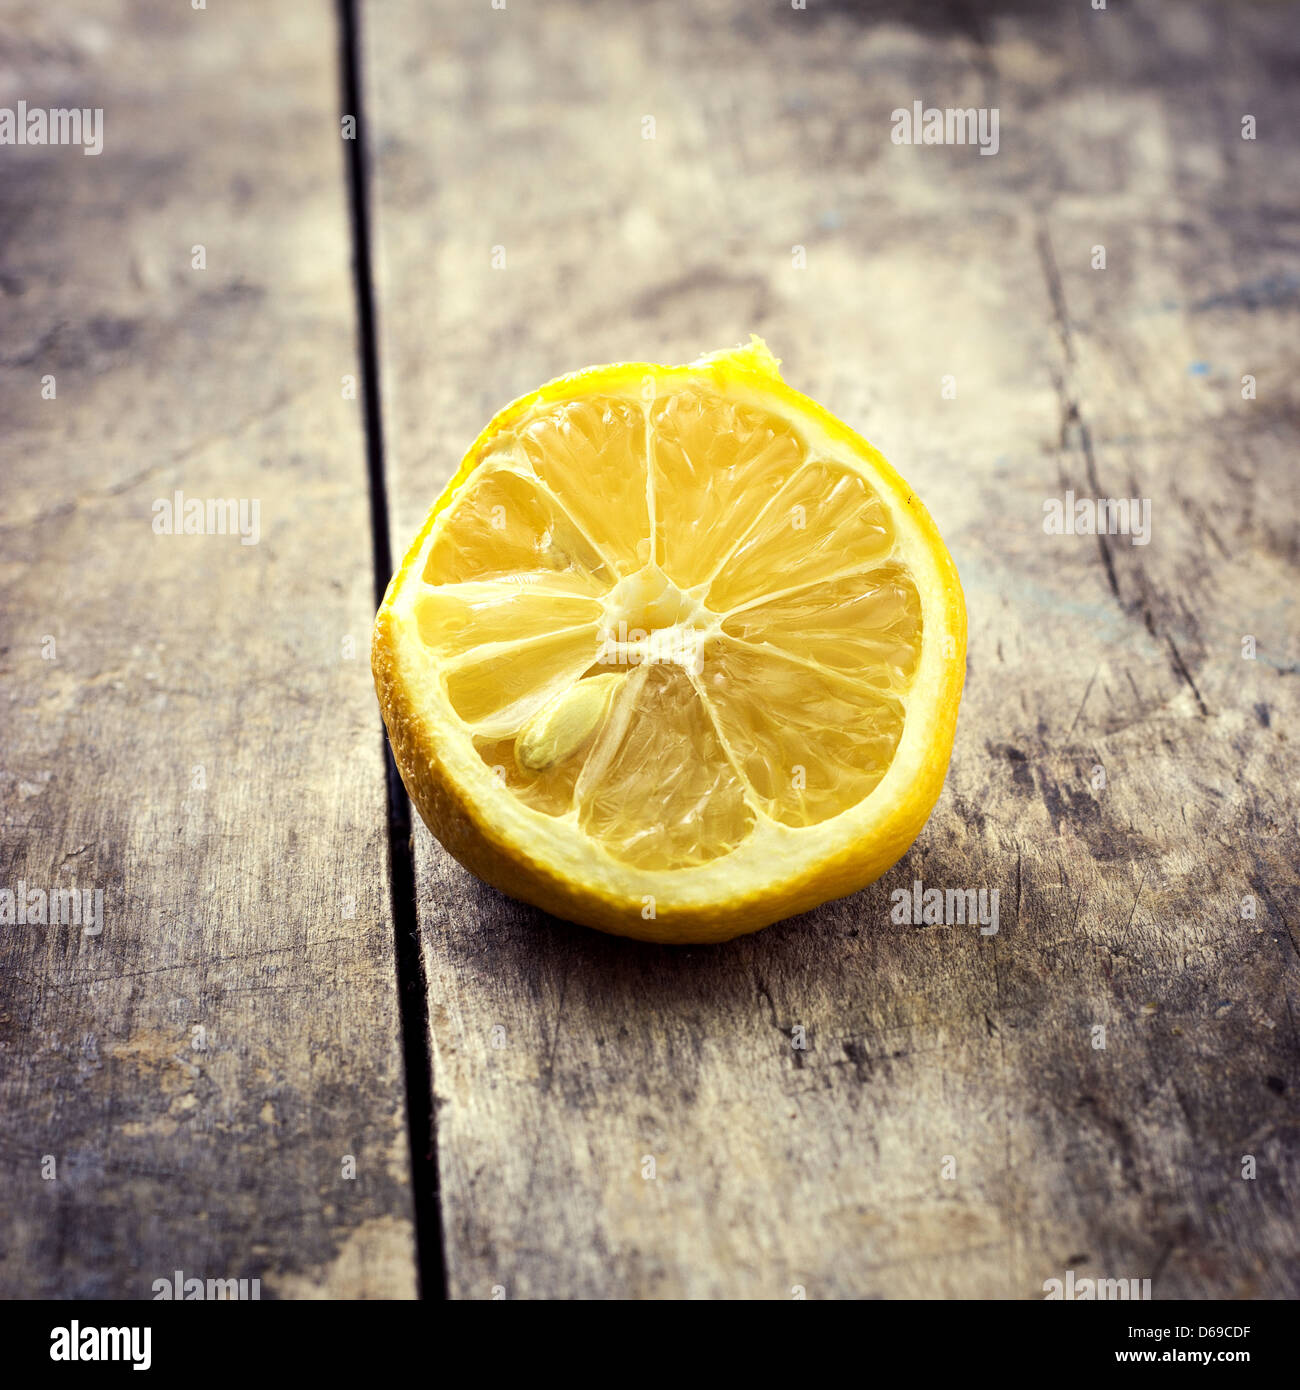 Withered Half Lemon on old wooden table,retro look Stock Photo